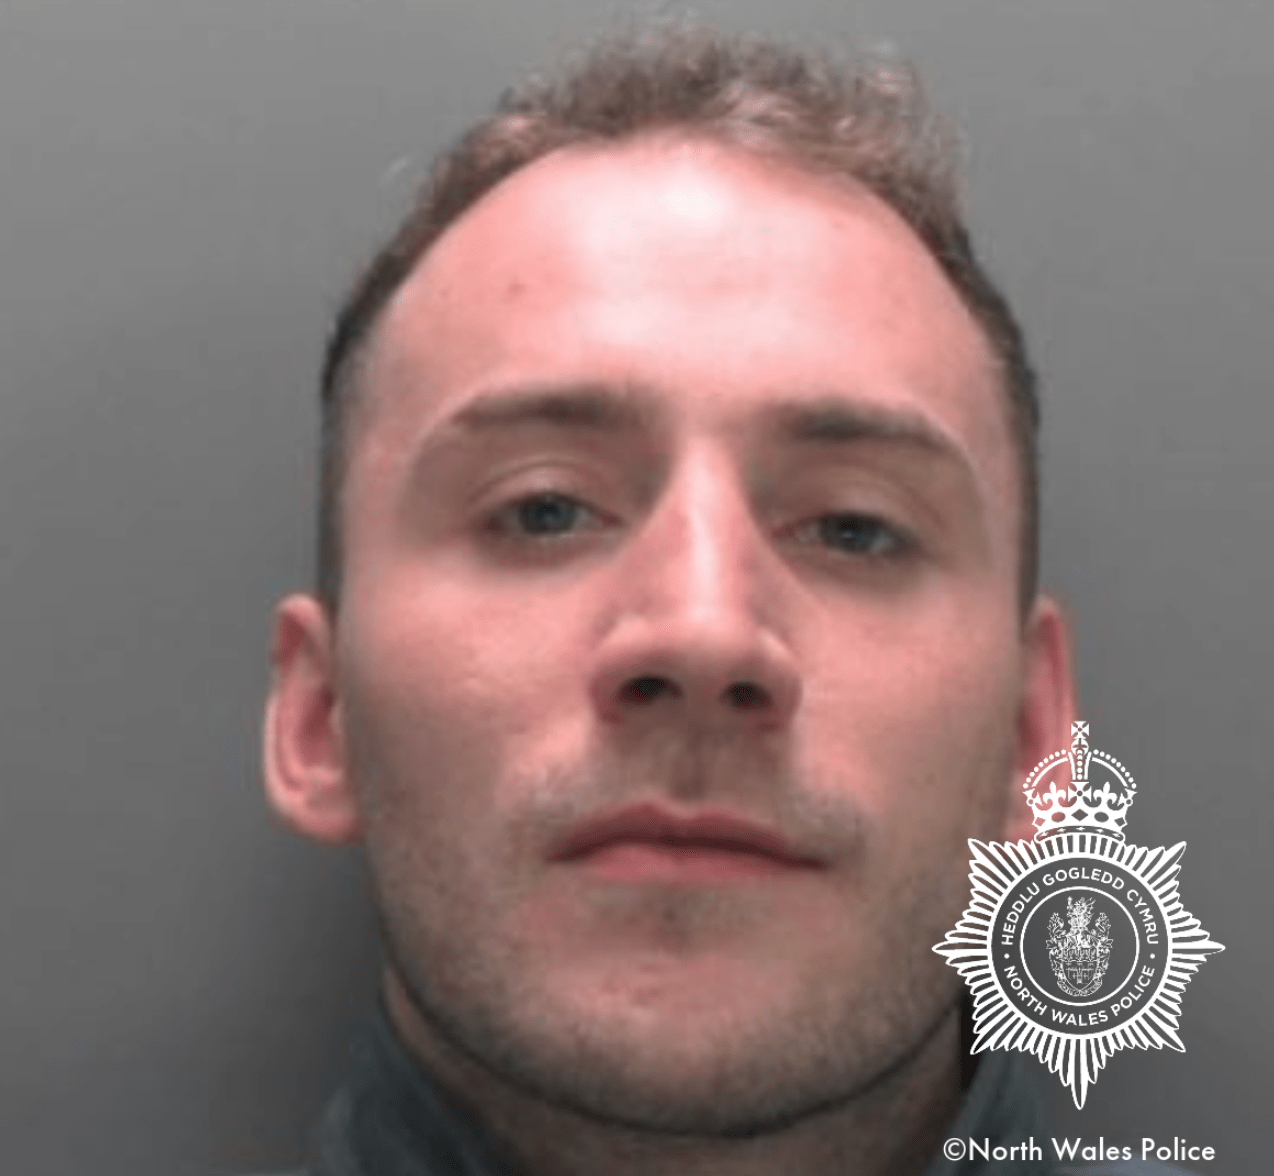 Man sentenced to life imprisonment following attempted murder of two